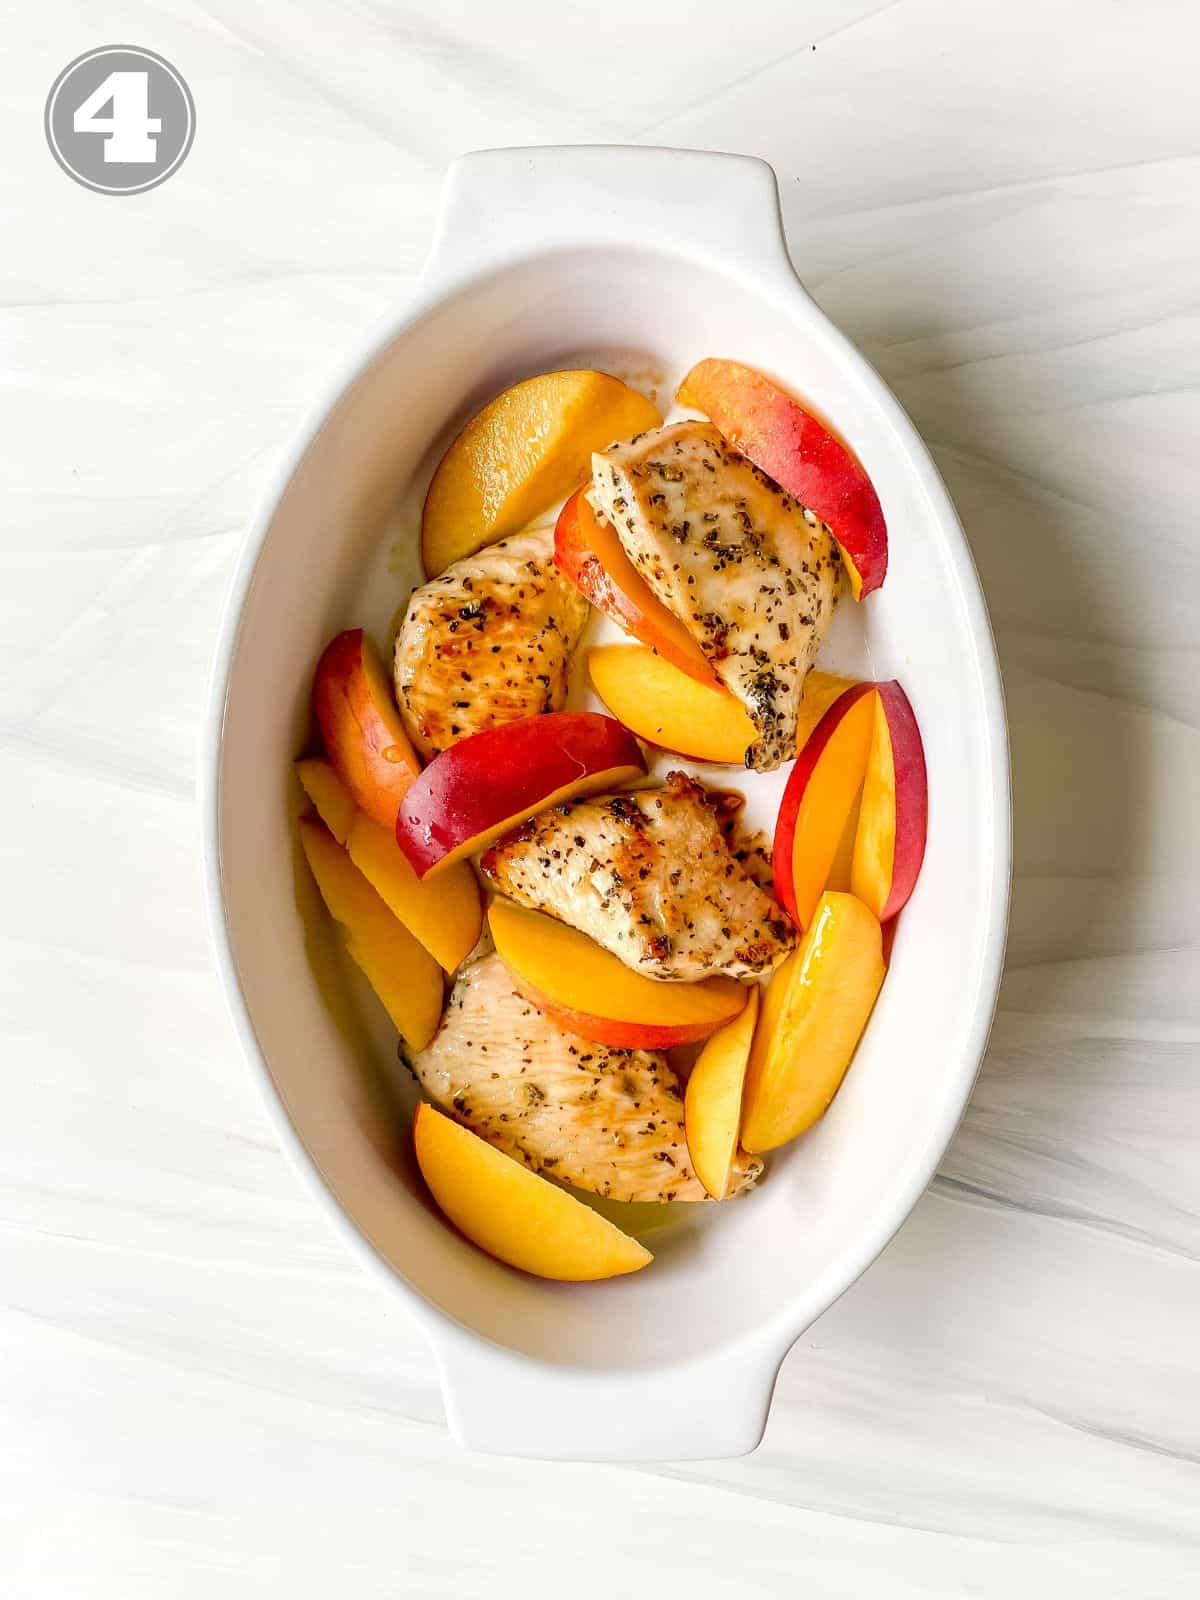 chicken and nectarines in a white ovenproof dish labelled number four.